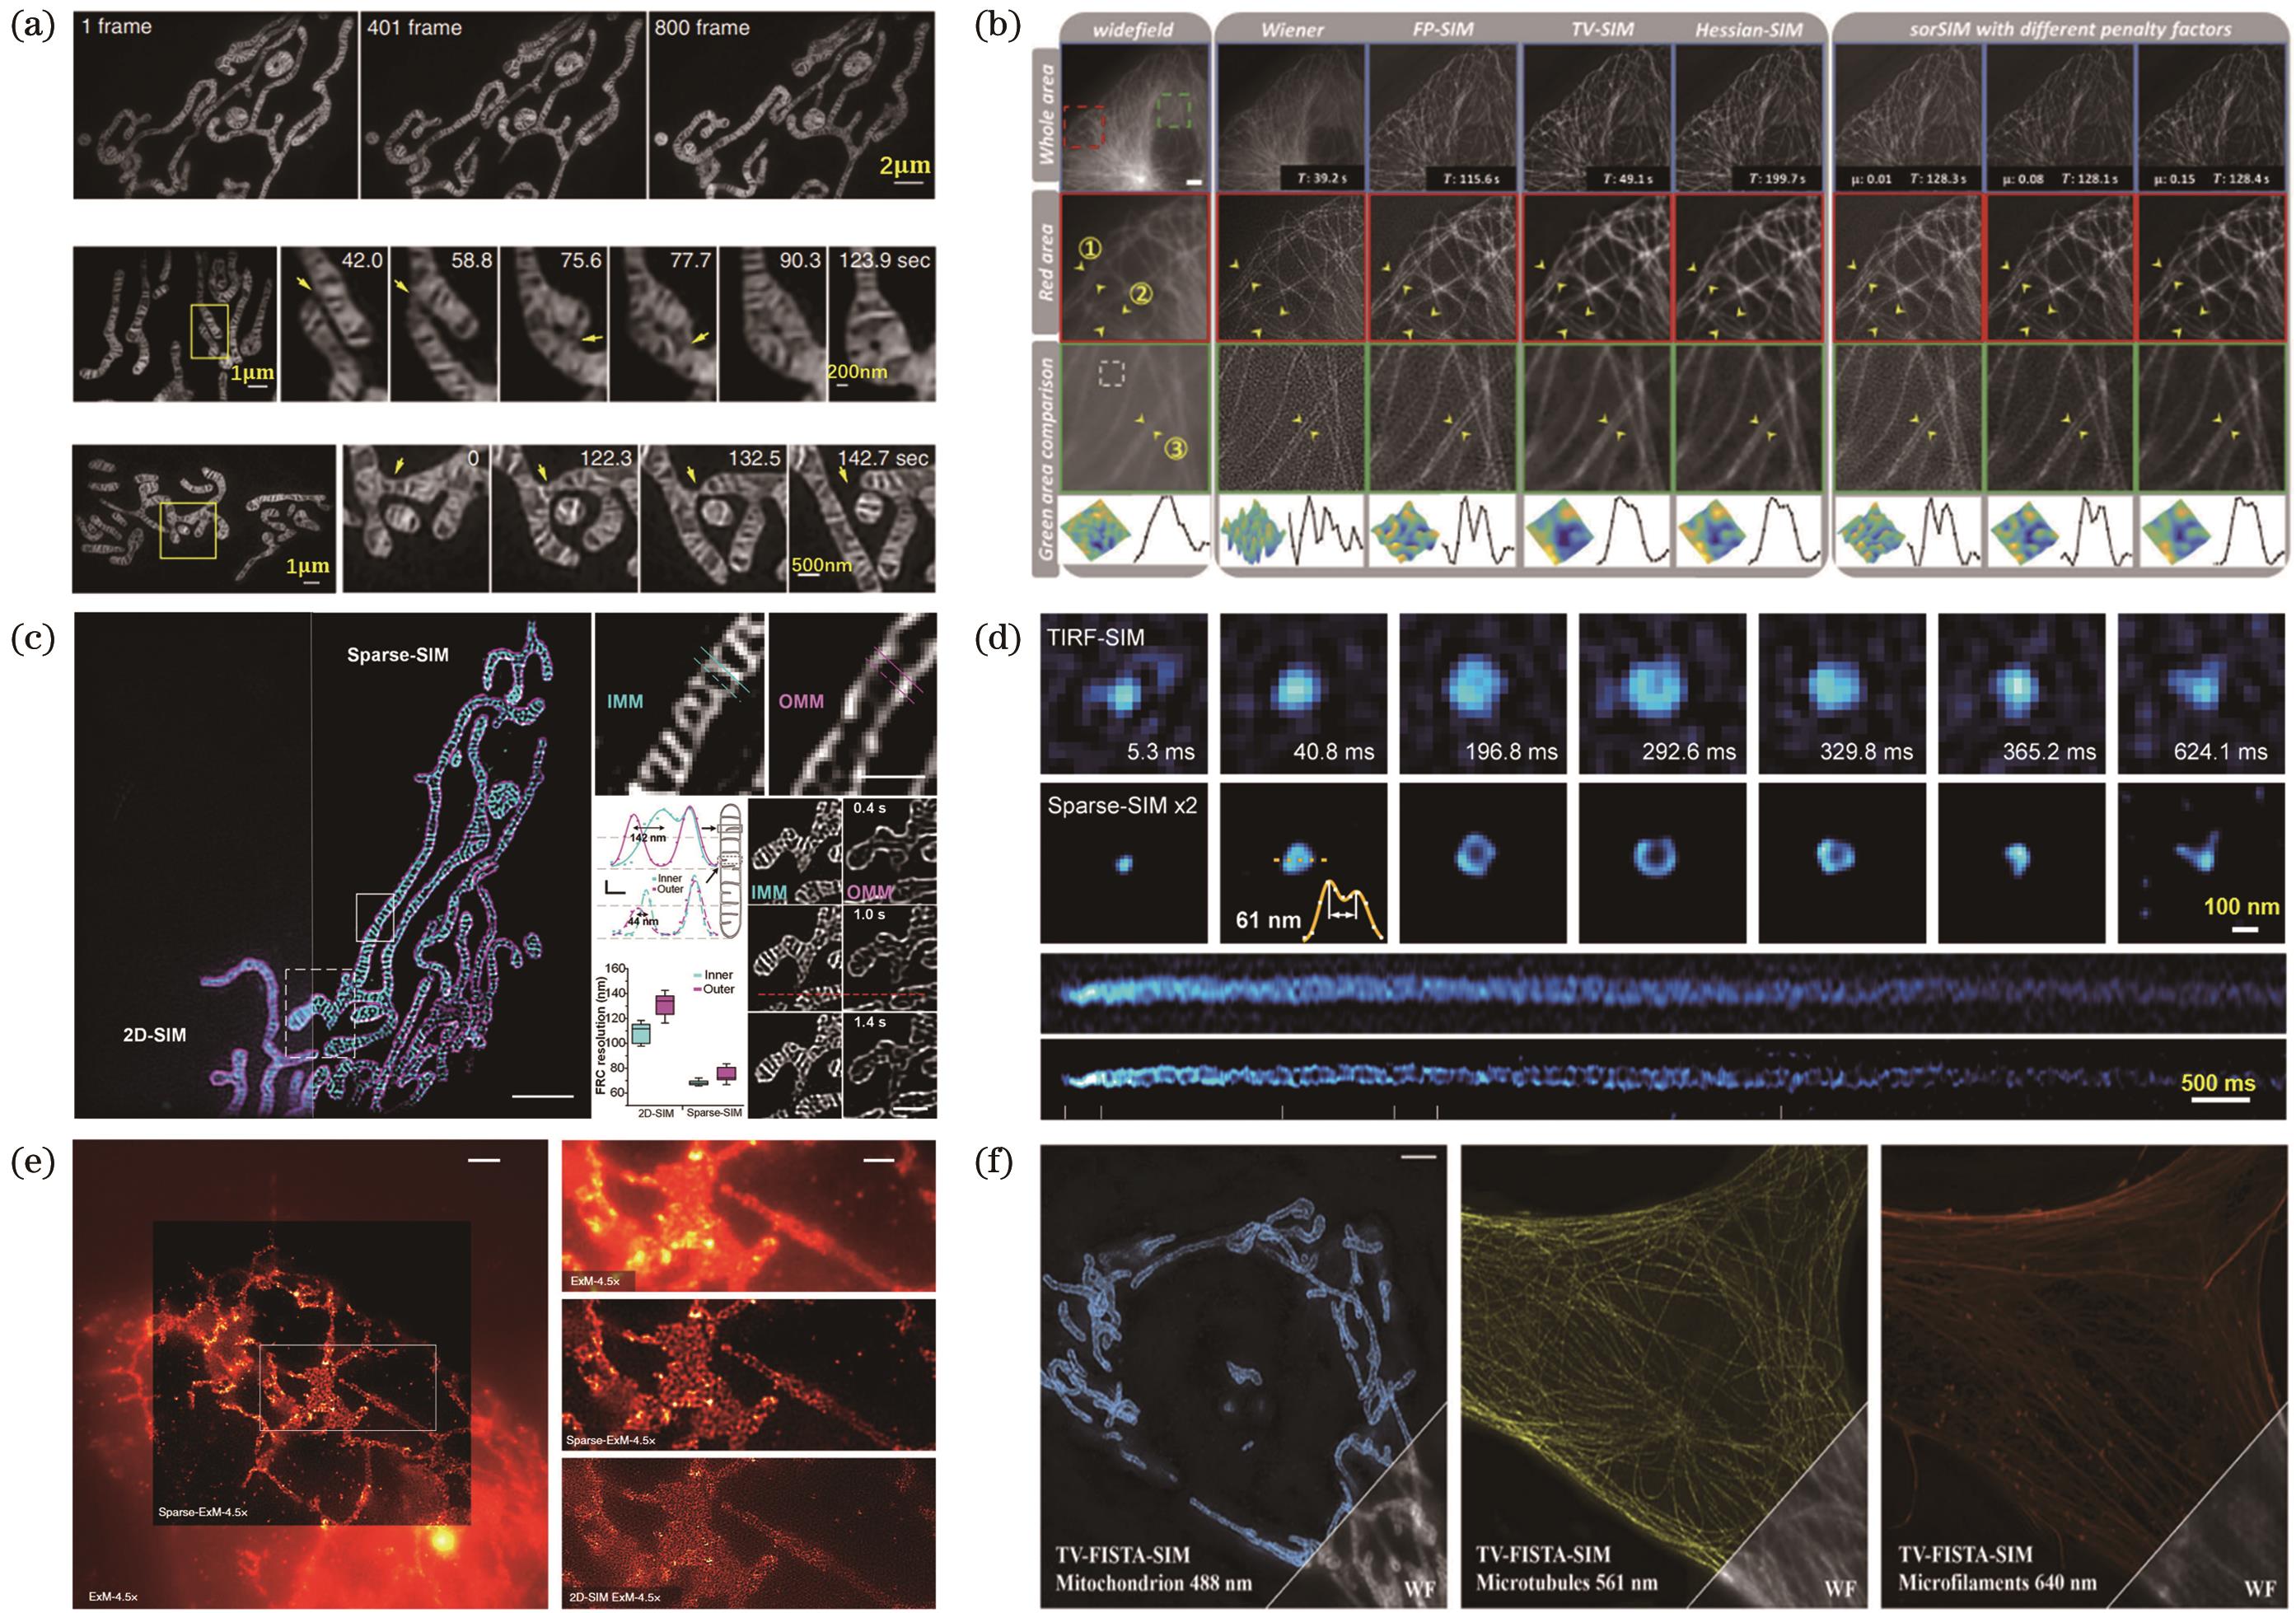 Super-resolution imaging results based on regularization deconvolution algorithms in structured illumination microscopy. (a) Dynamics of mitochondrial cristae structure in live cells based on Hessian-SIM[41]; (b) sorSIM reconstruction of microtubule-stained images in Vero cells[42]; (c) Sparse-SIM reconstruction of both inner and outer mitochondrial membranes in live COS-7 cells[8]; (d) super-fast imaging of fusion pores in INS-1 cells based on Sparse-SIM[8]; (e) super-resolution reconstruction results of Sparse-ExM[8]; (f) nulti-color 3D-SIM reconstruction of TV-FISTA-SIM (from left to right: outer mitochondrial membrane, microtubule protein, and actin imaging)45]